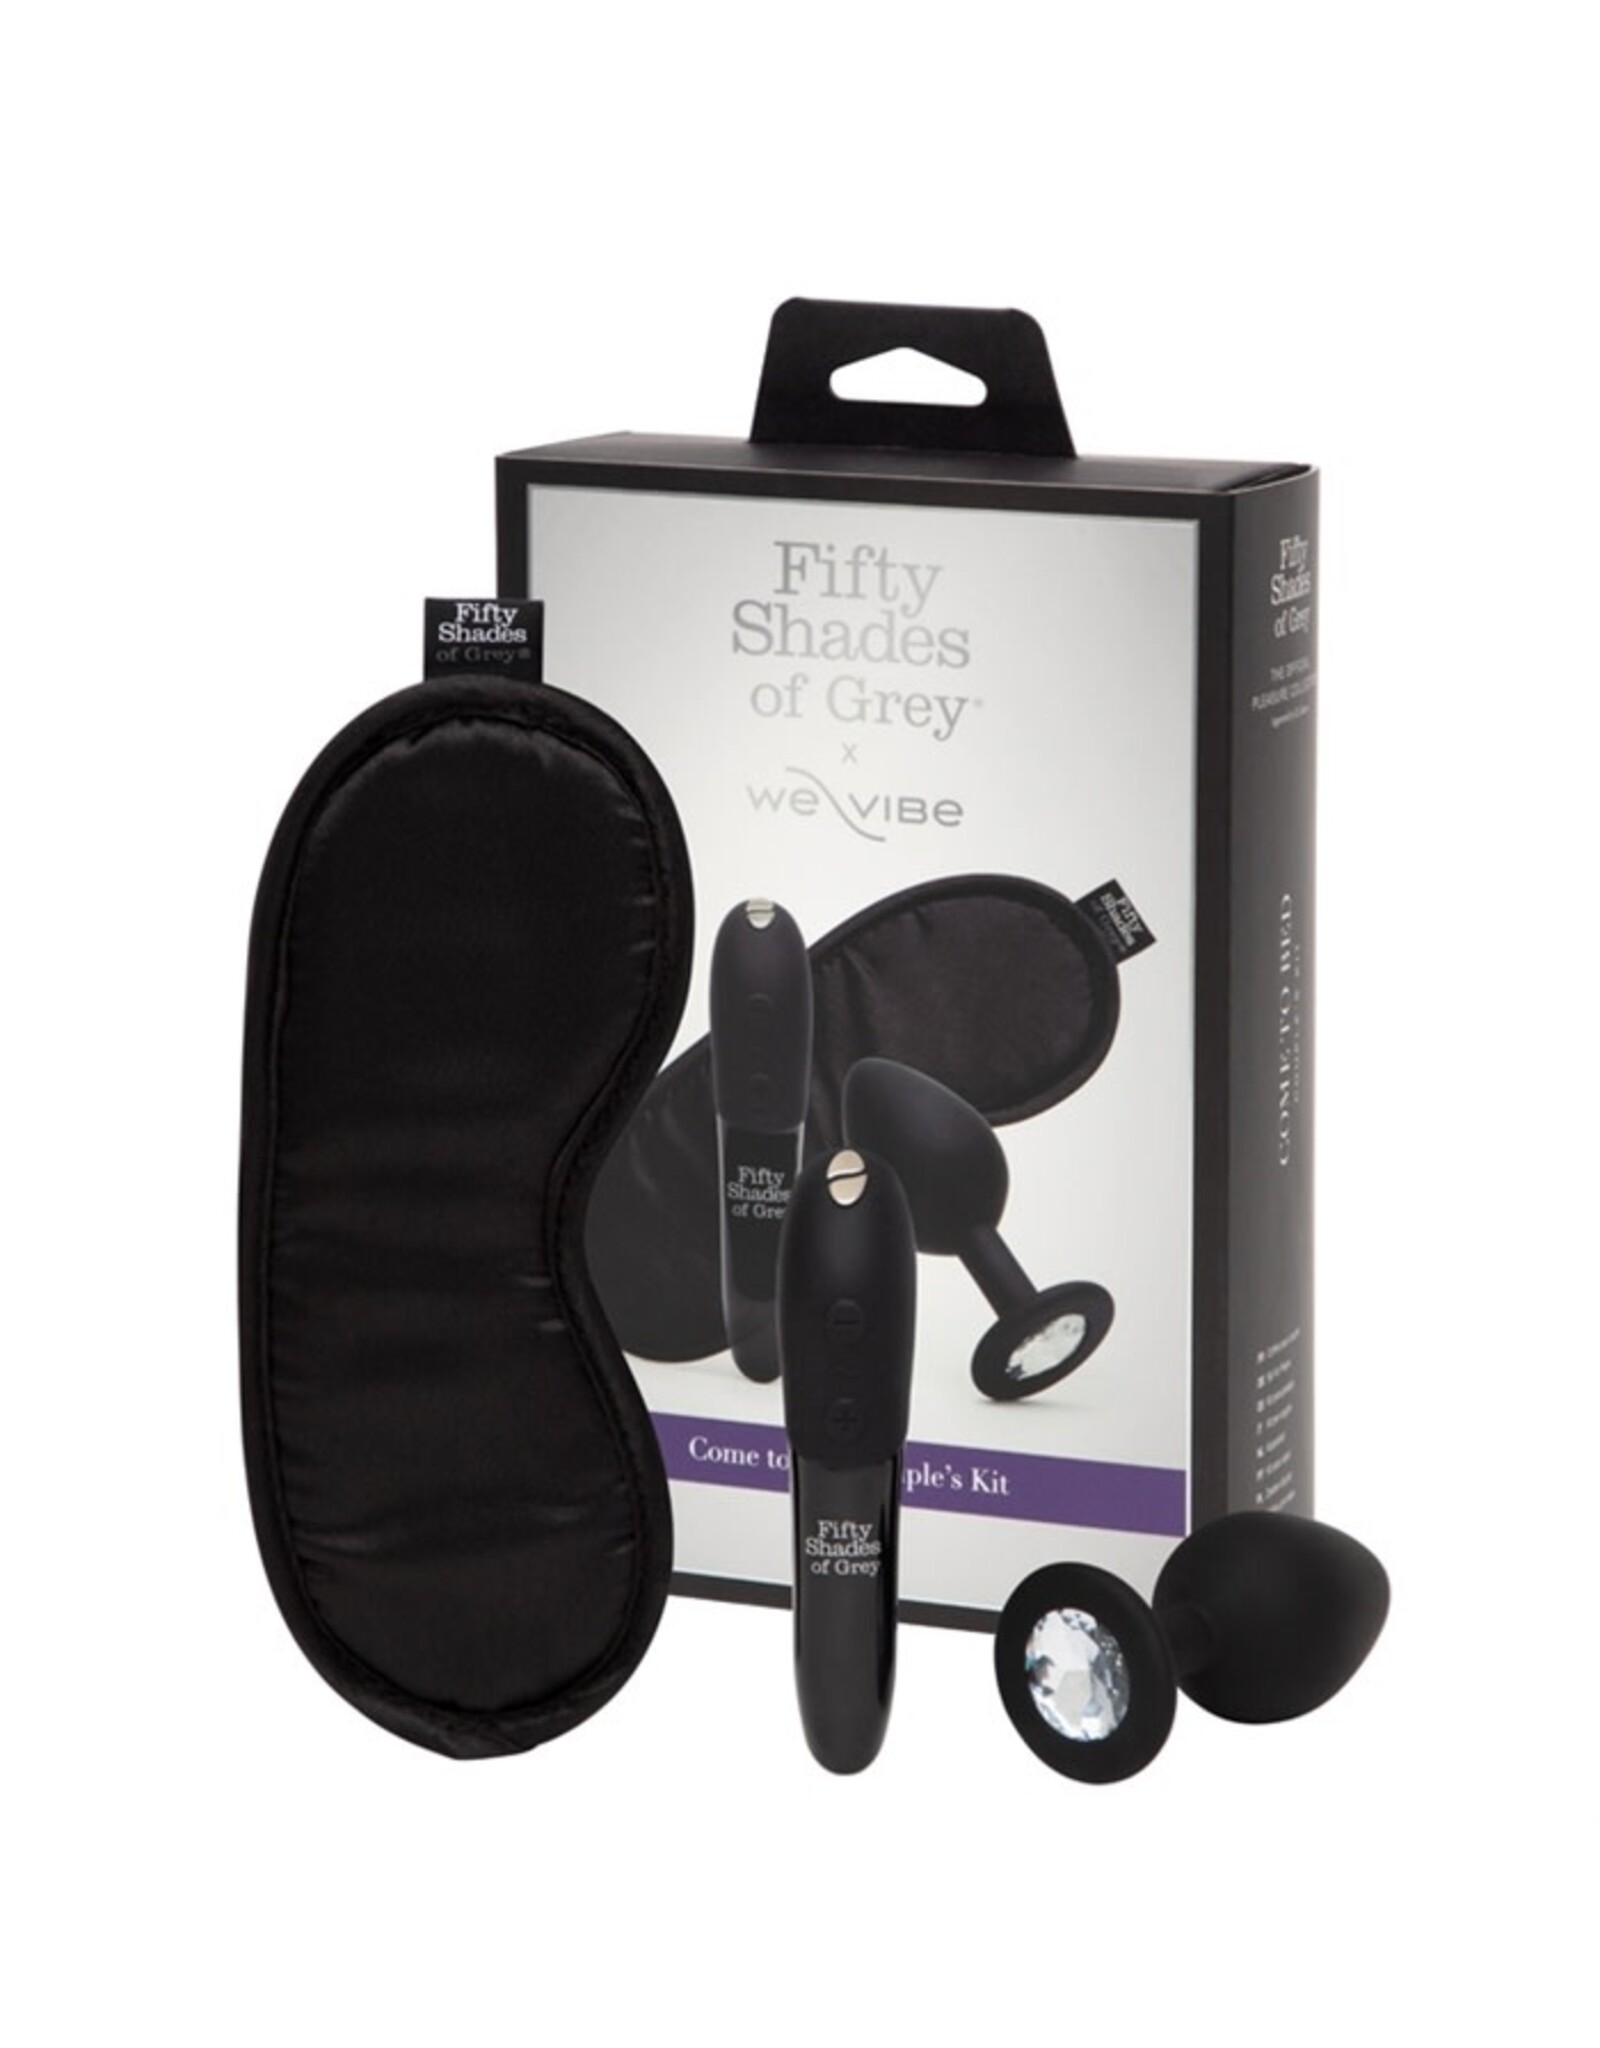 Fifty Shades - Come to Bed Couple's Kit